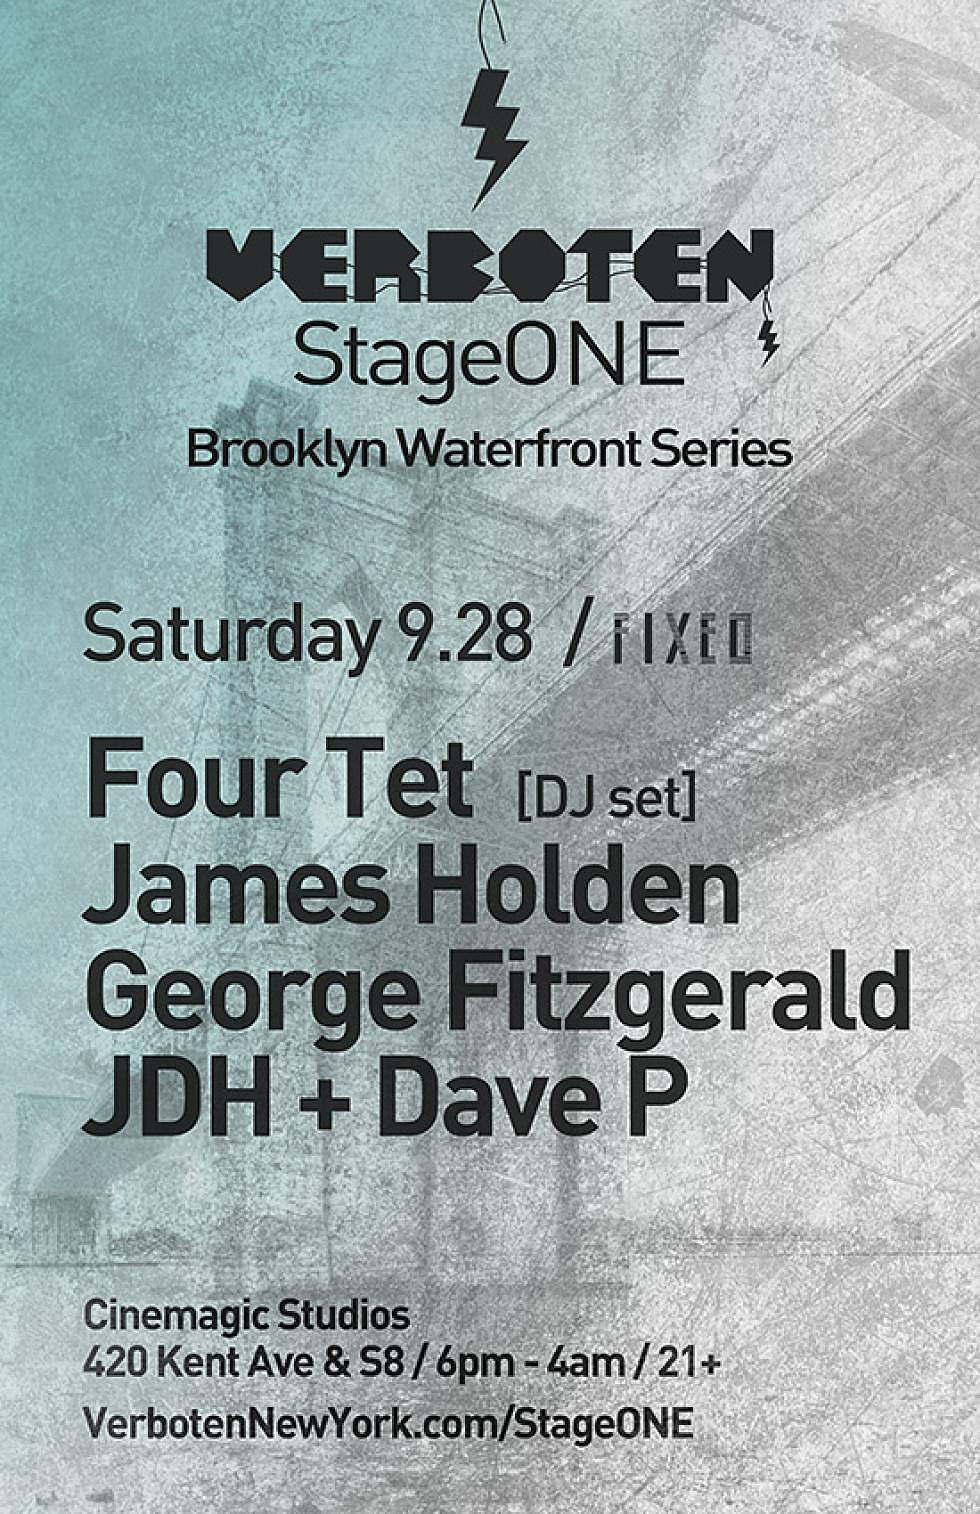 Verboten Continues Impressive Waterfont Dance Series this Saturday 9/28